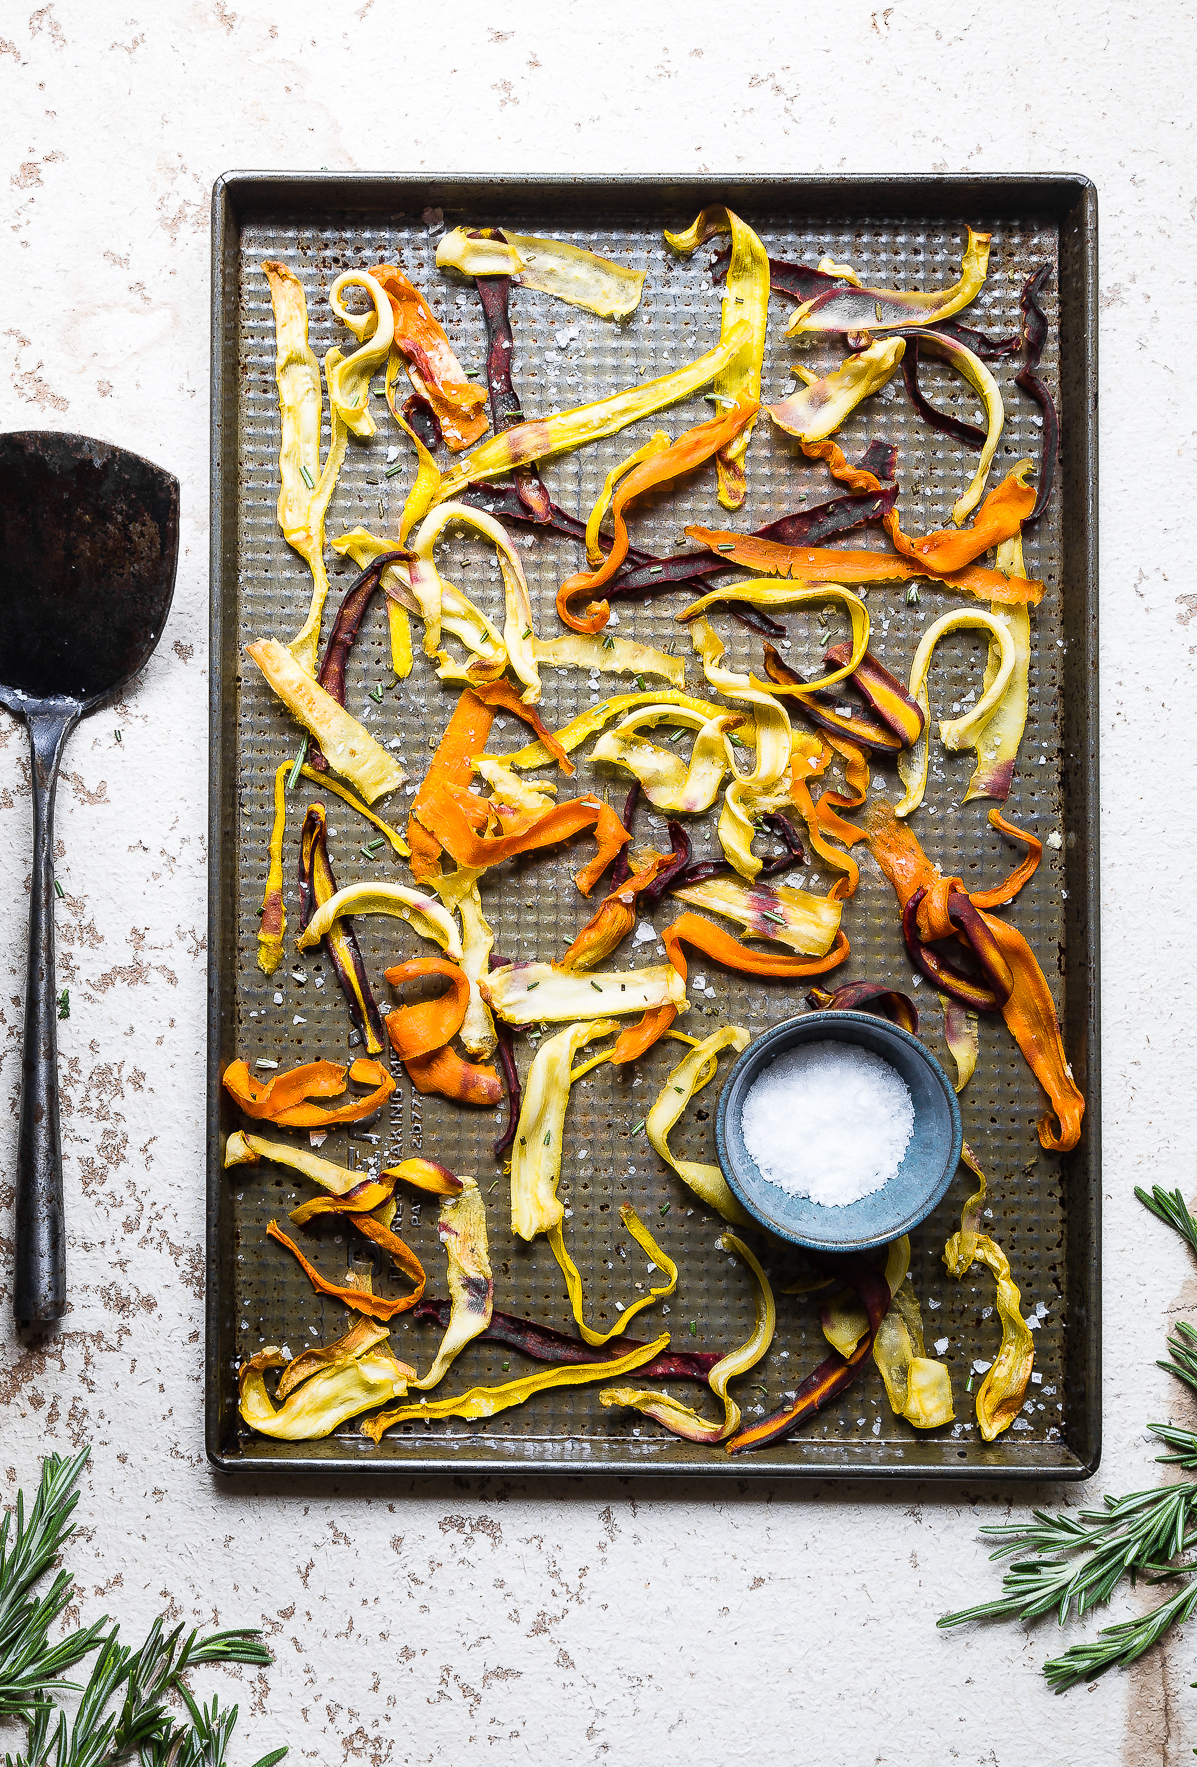 Baked Carrot Crisps with Rosemary and Sea Salt